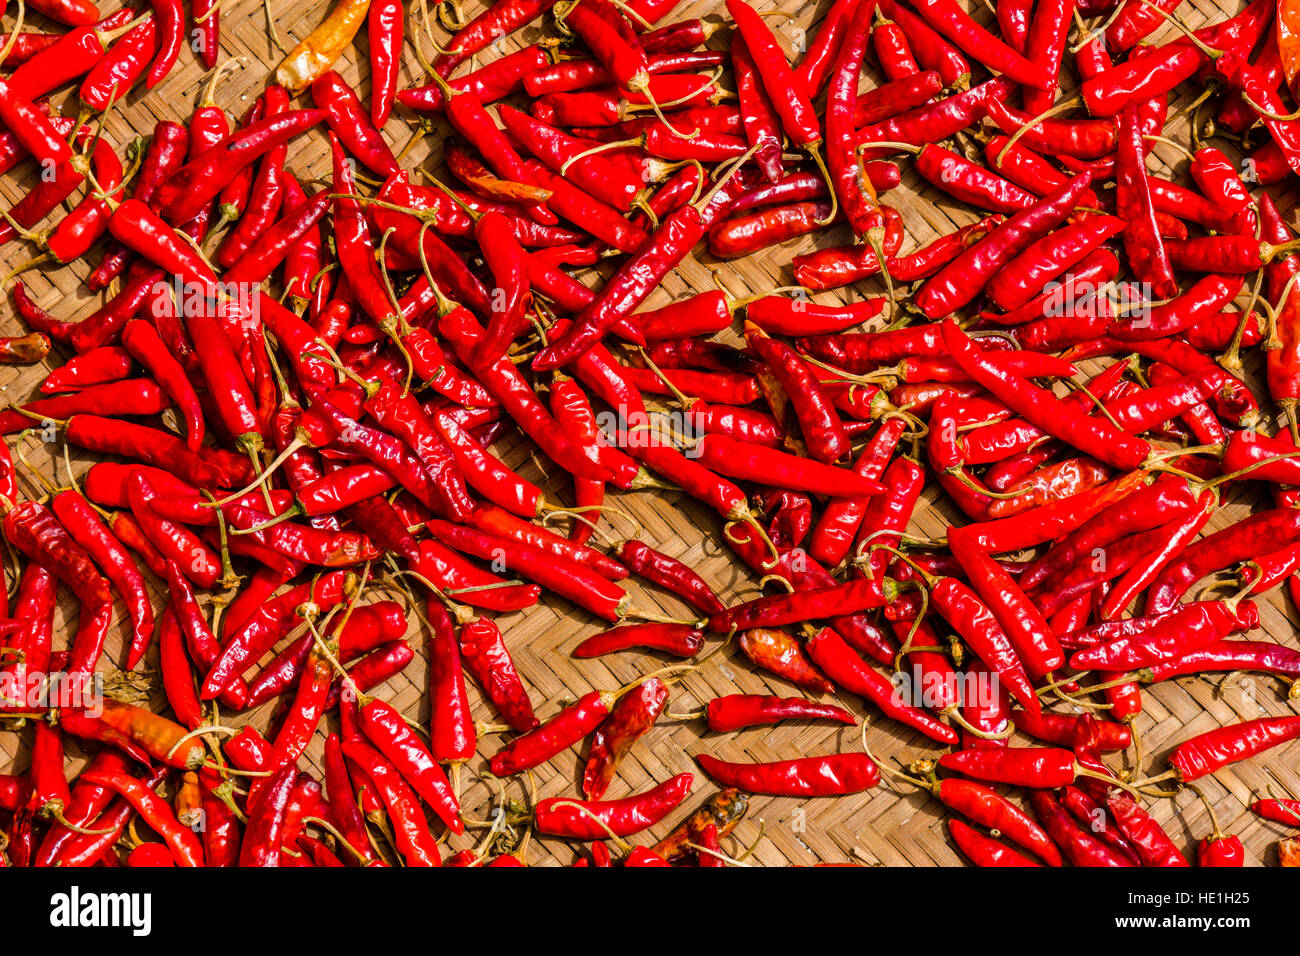 Chili's are drying in the sun on a braided mat Stock Photo